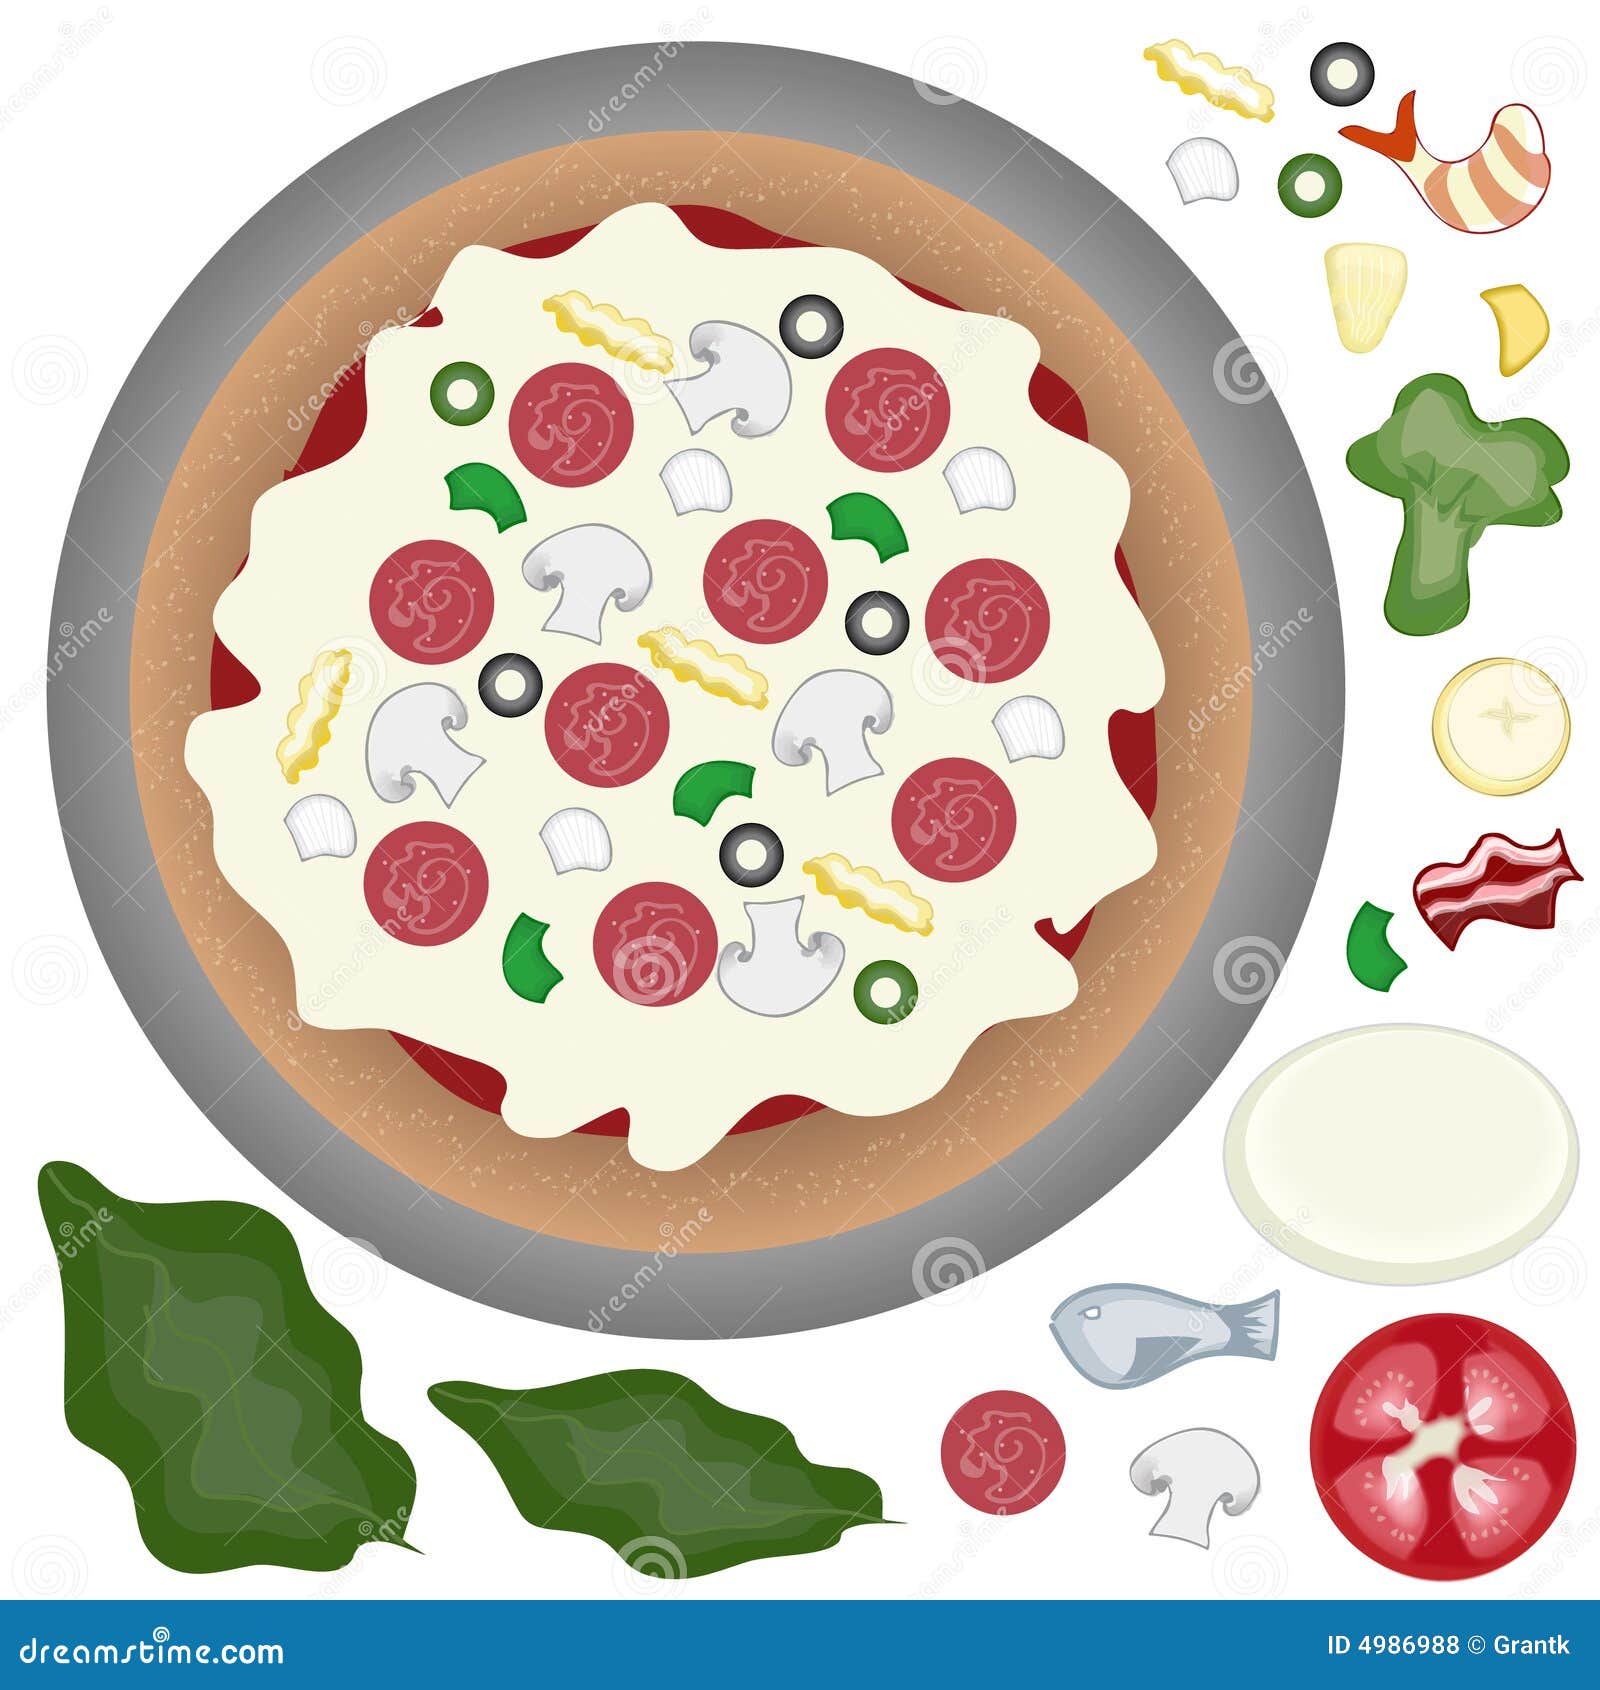 pizza toppings clipart - photo #40